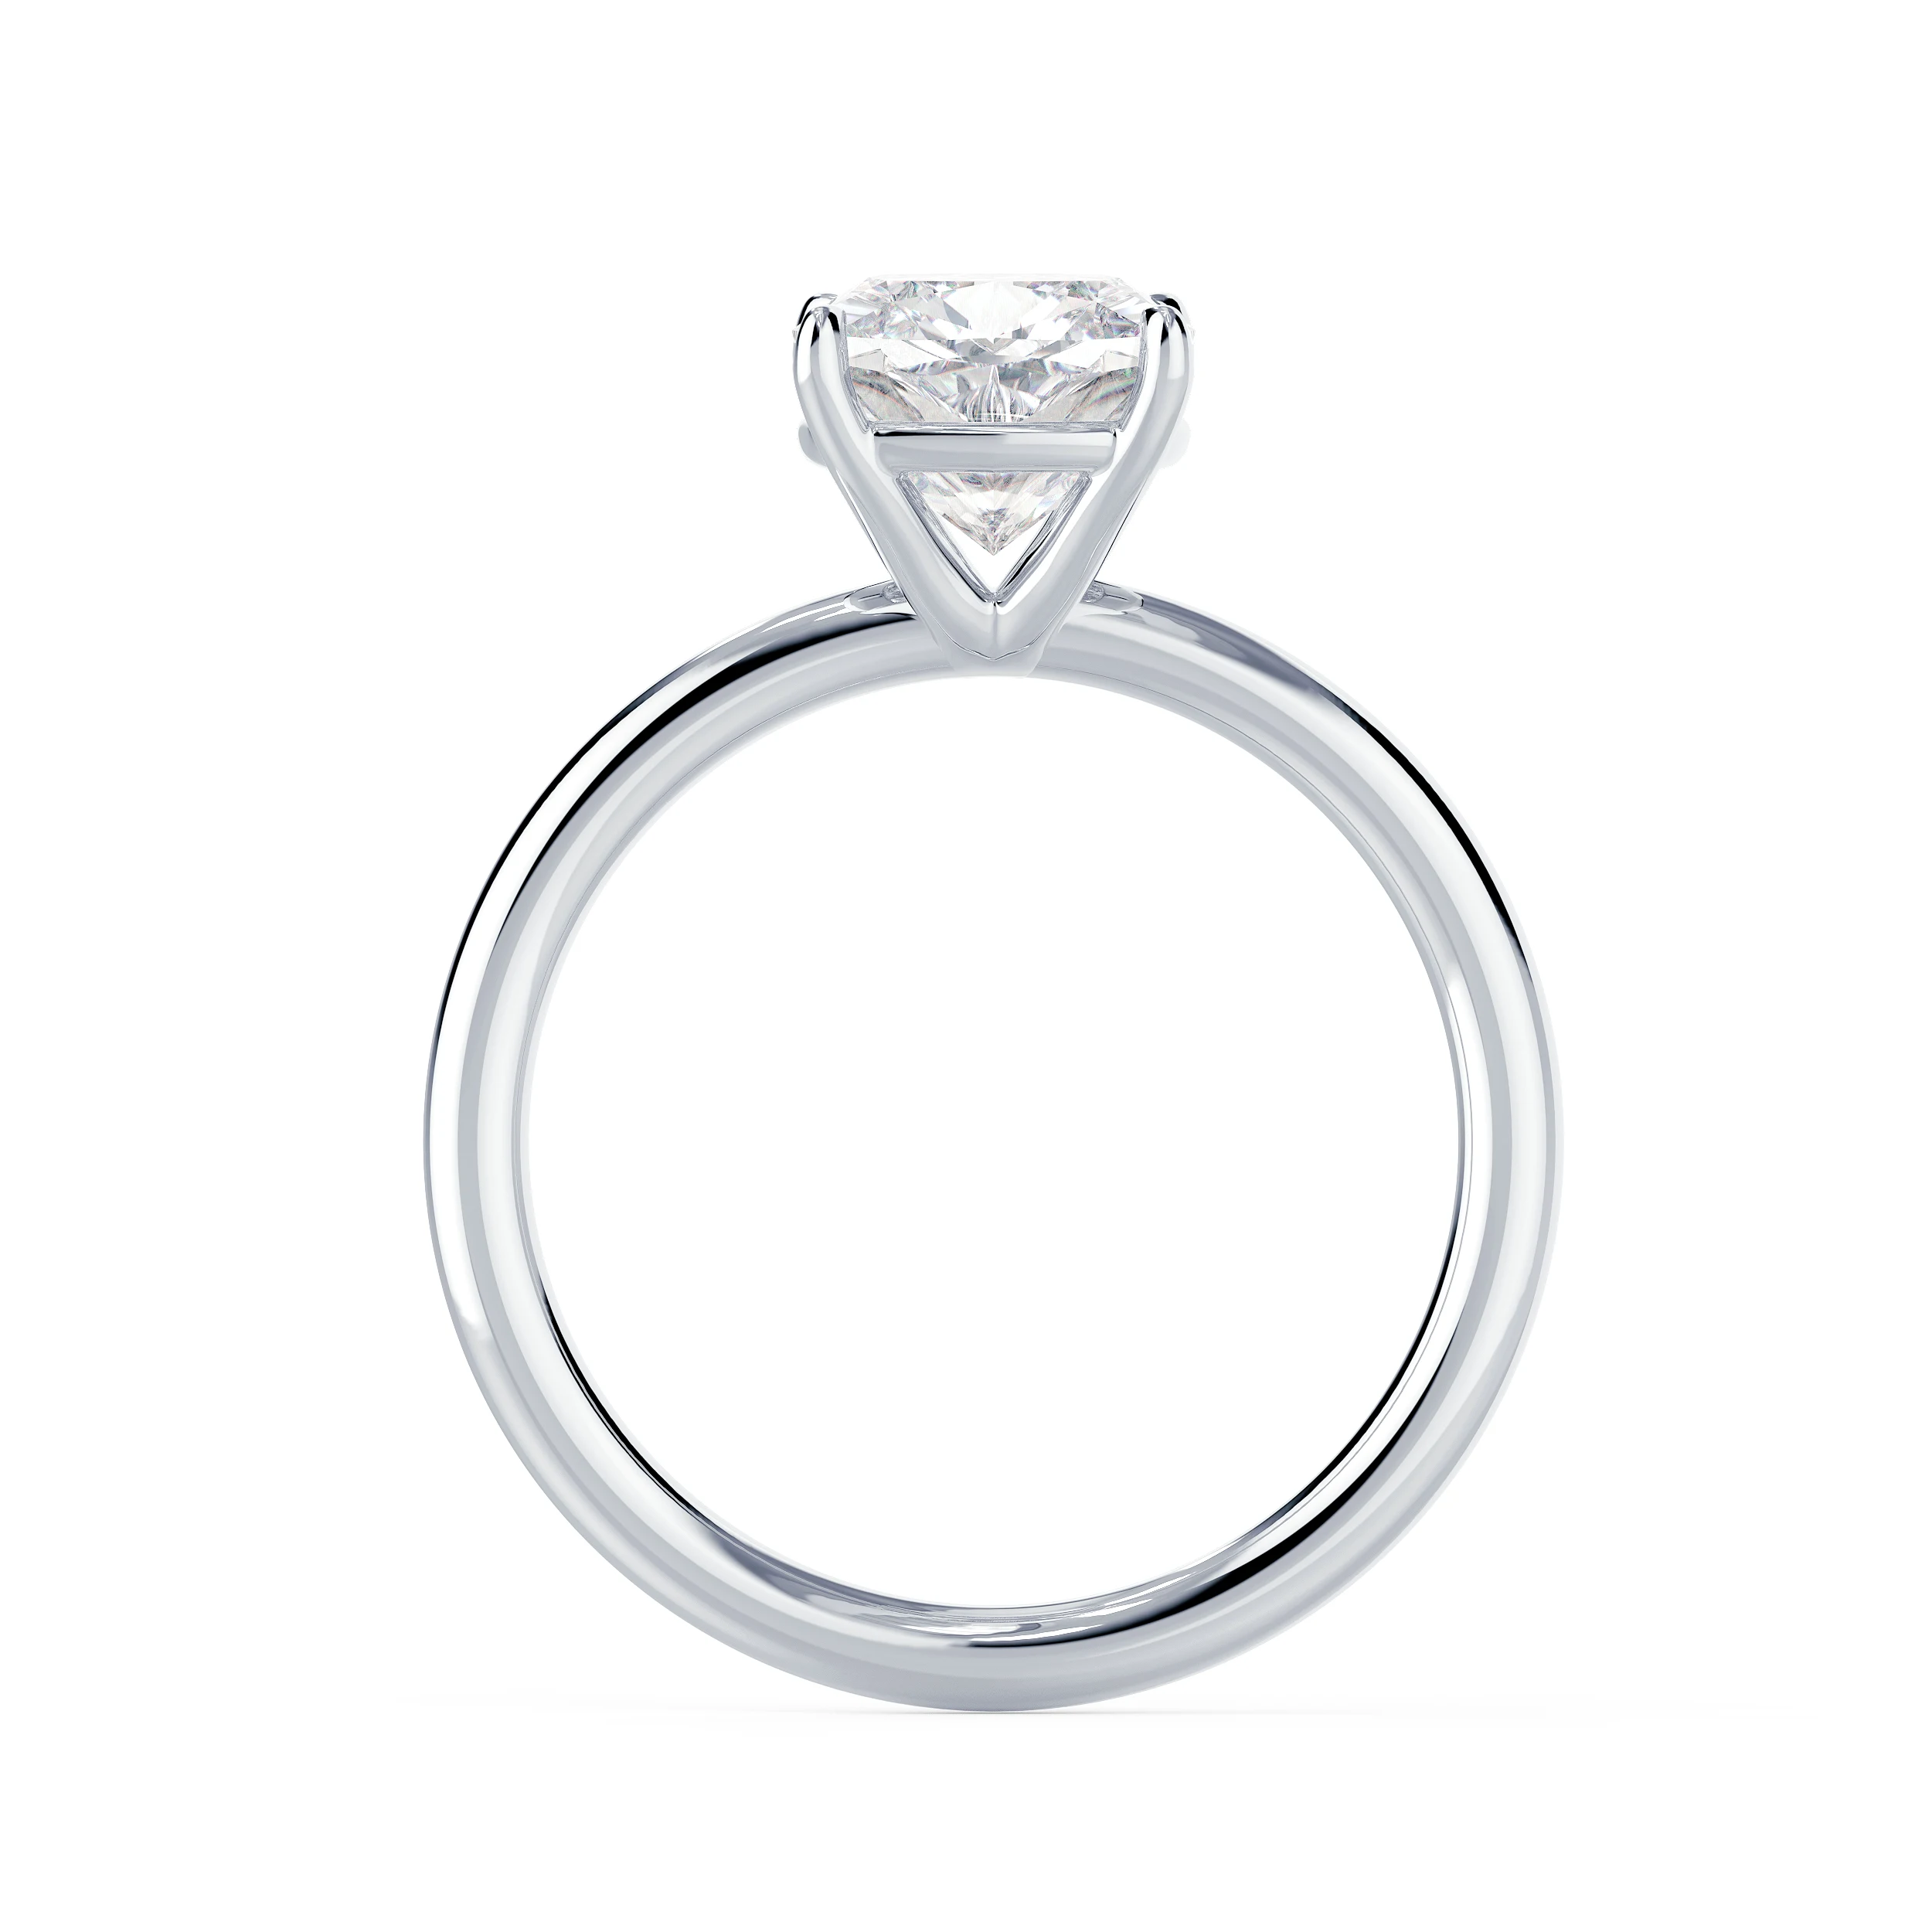 High Quality Lab Diamonds Cushion Petite Four Prong Solitaire Diamond Engagement Ring in White Gold (Profile View)